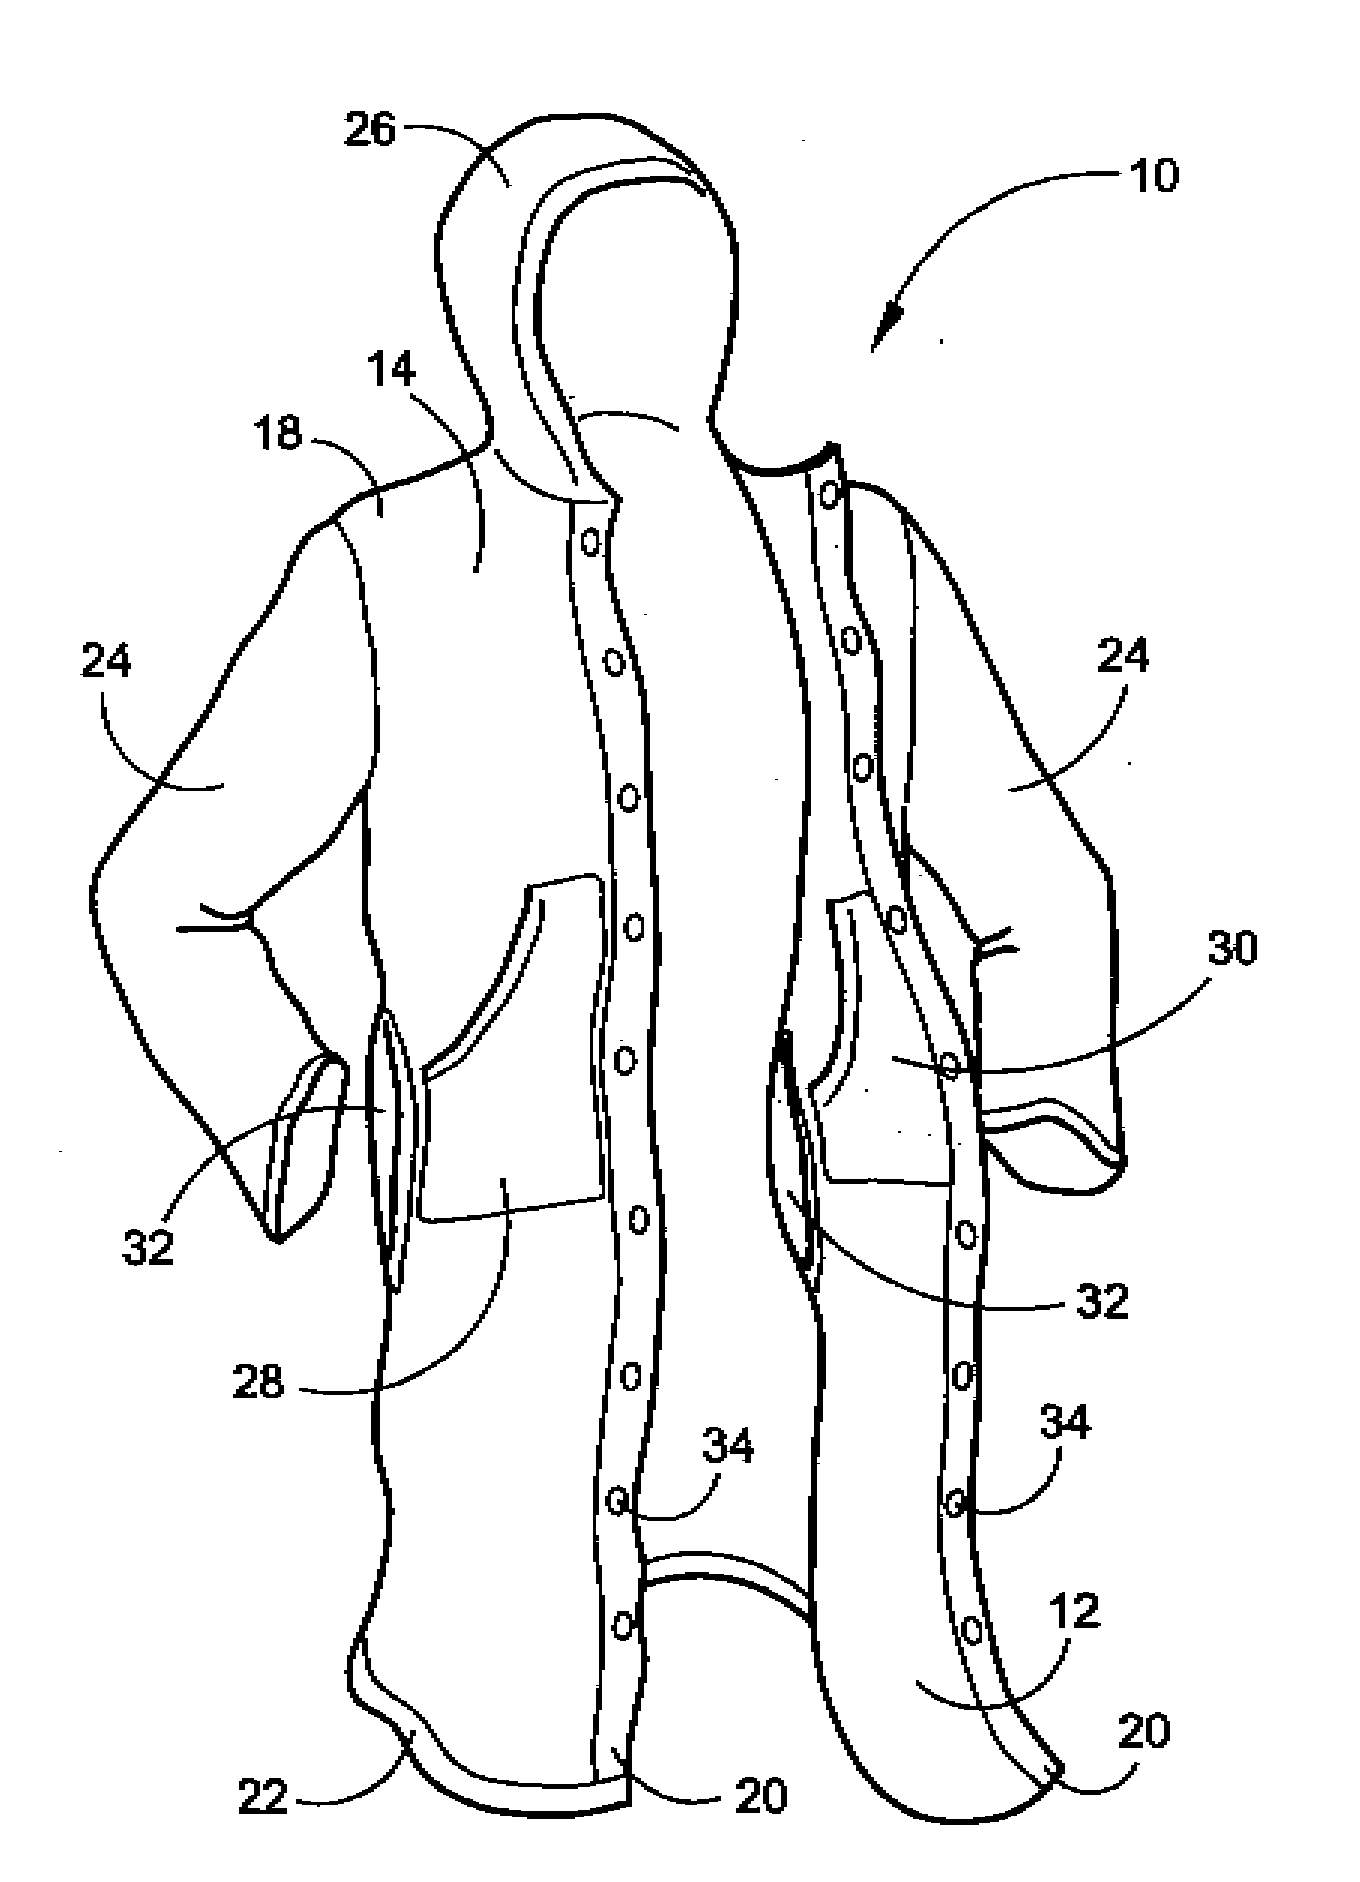 Wearable protective changing garment